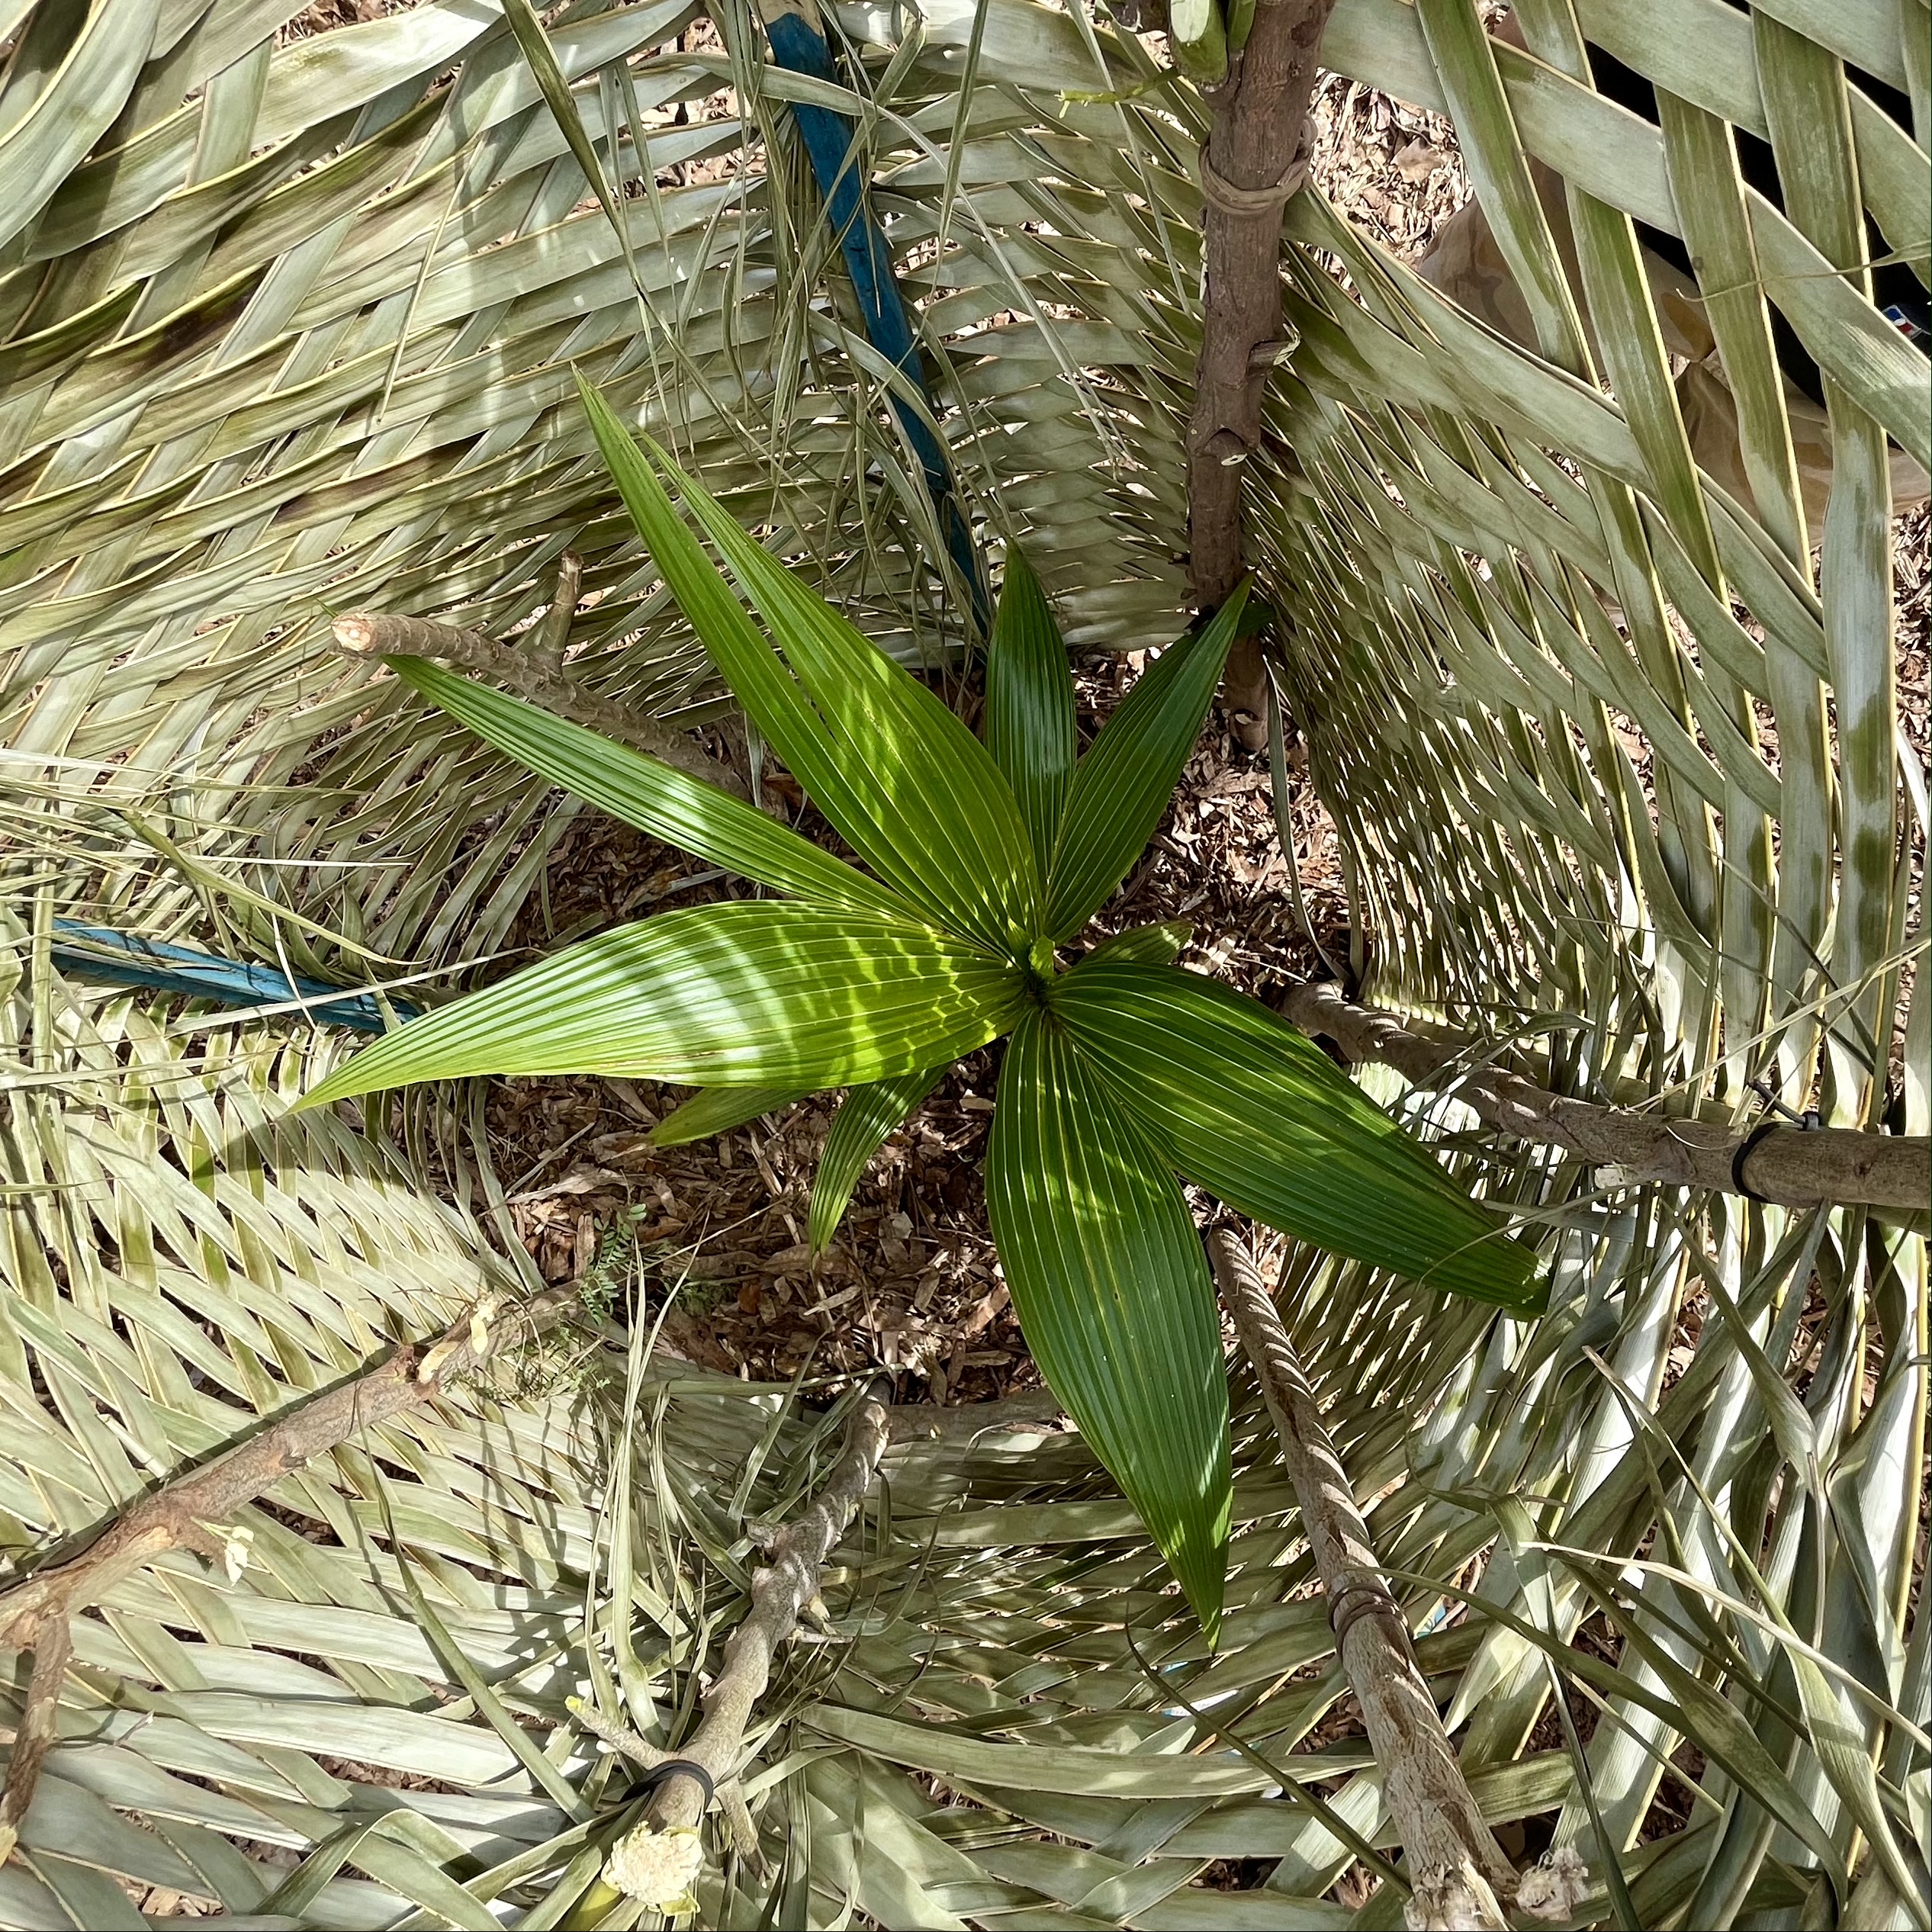 Top view of a newly planted coconut surrounded by a woven shelter of coconut palm leaves.